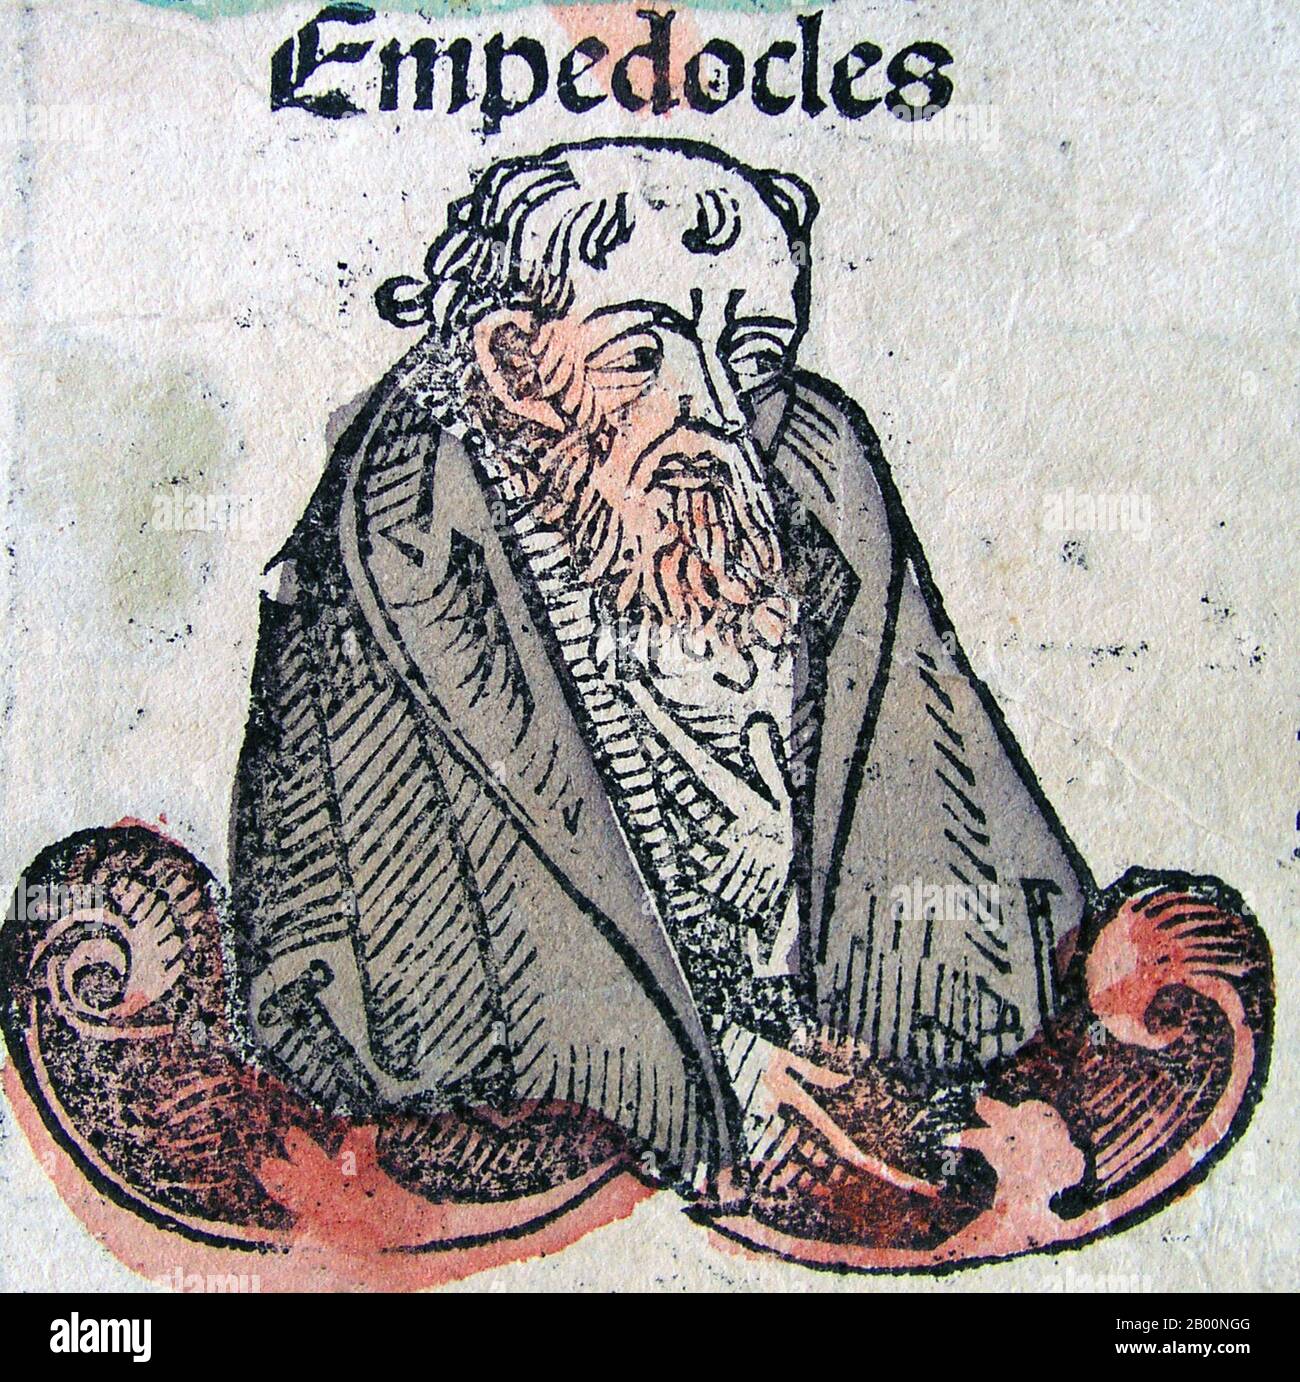 Germany: 'Empedocles'. The Nuremberg Chronicle, by Hartmann Schedel (1440-1514), 1493.  The Nuremberg Chronicle is an illustrated world history. Its structure follows the story of human history as related in the Bible, including the histories of a number of important Western cities. Written in Latin by Hartmann Schedel, with a version in German translation by Georg Alt, it appeared in 1493. It is one of the best-documented early printed books. It is classified as an incunabulum, a book, pamphlet, or broadside that was printed (not handwritten) before the year 1501 in Europe. Stock Photo